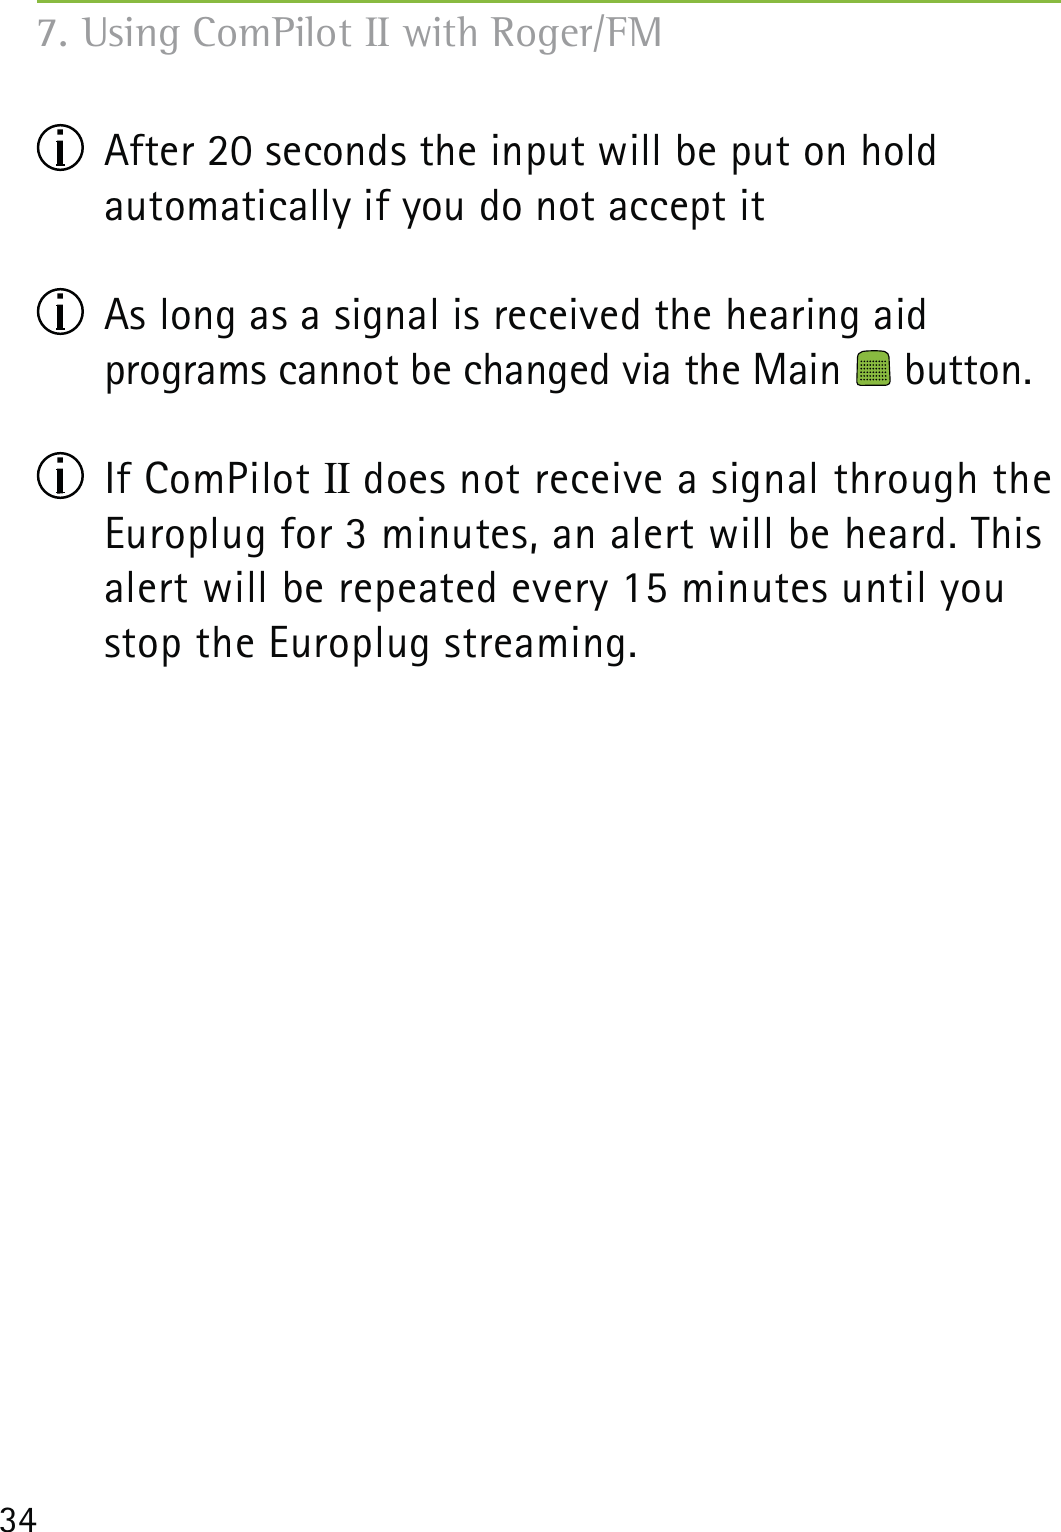 34  After 20 seconds the input will be put on hold  automatically if you do not accept it  As long as a signal is received the hearing aid  programs cannot be changed via the Main   button. If ComPilot II does not receive a signal through the Europlug for 3 minutes, an alert will be heard. This alert will be repeated every 15 minutes until you stop the Europlug streaming.7. Using ComPilot II with Roger/FM